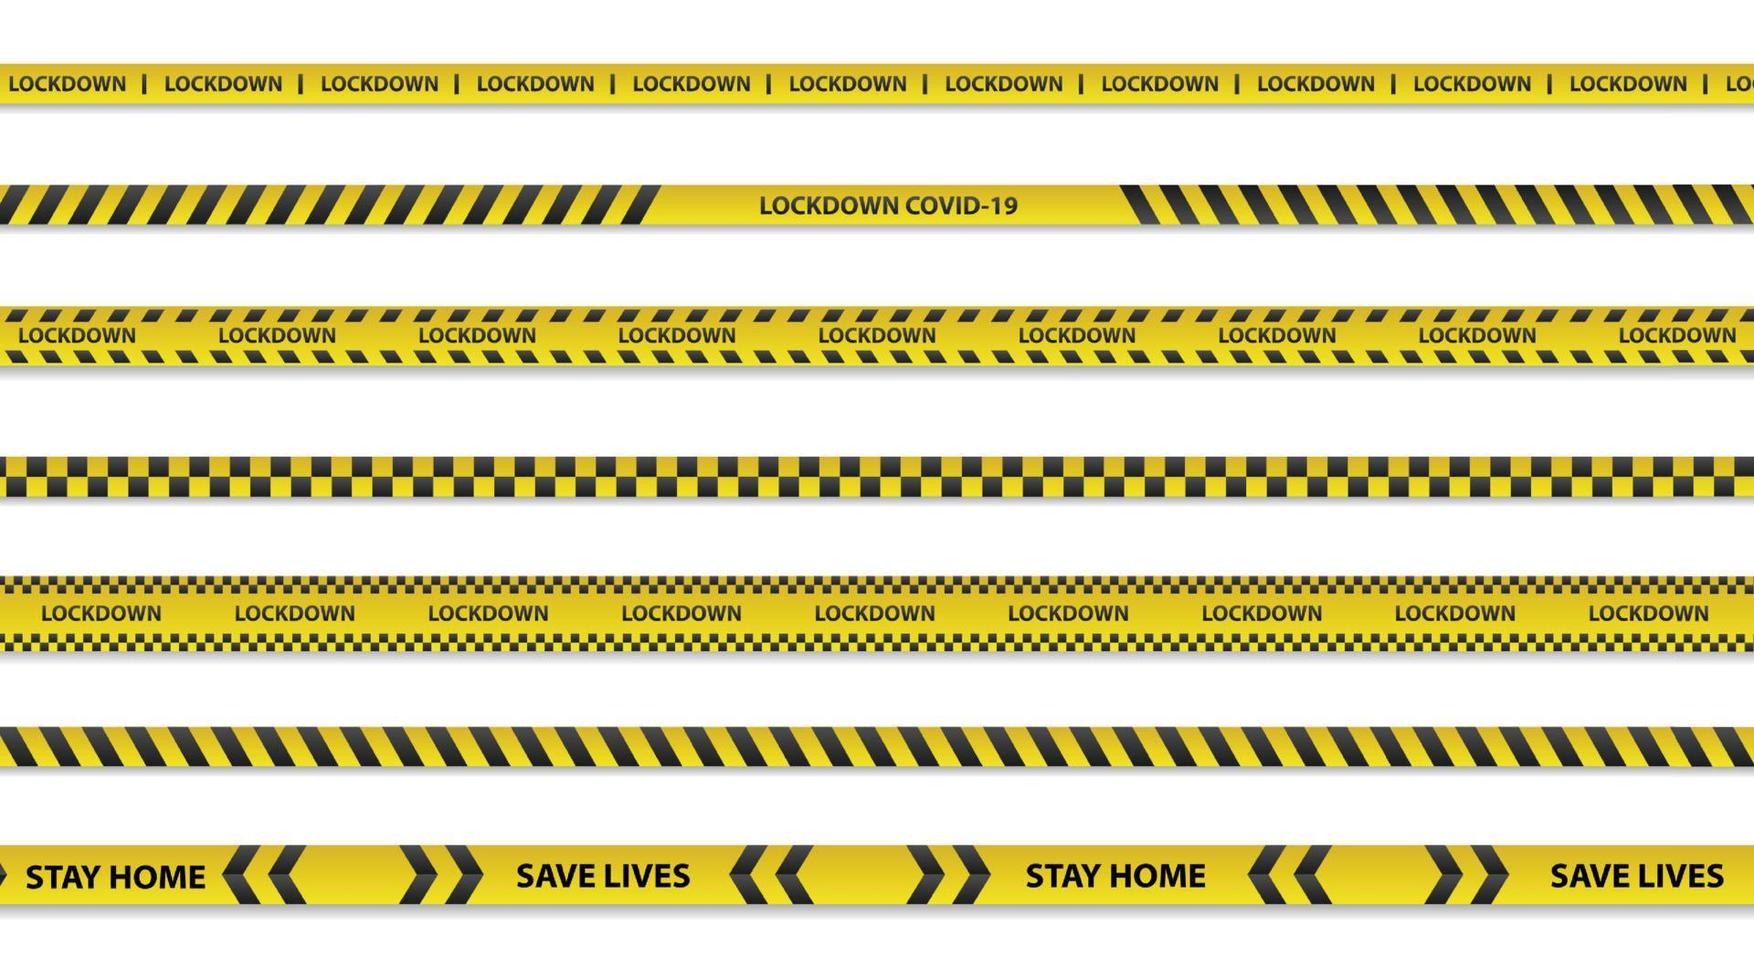 Concept of national lockdown due to coronavirus. announce movement control order emergency state restrictions to combat the spread of the virus. vector design.